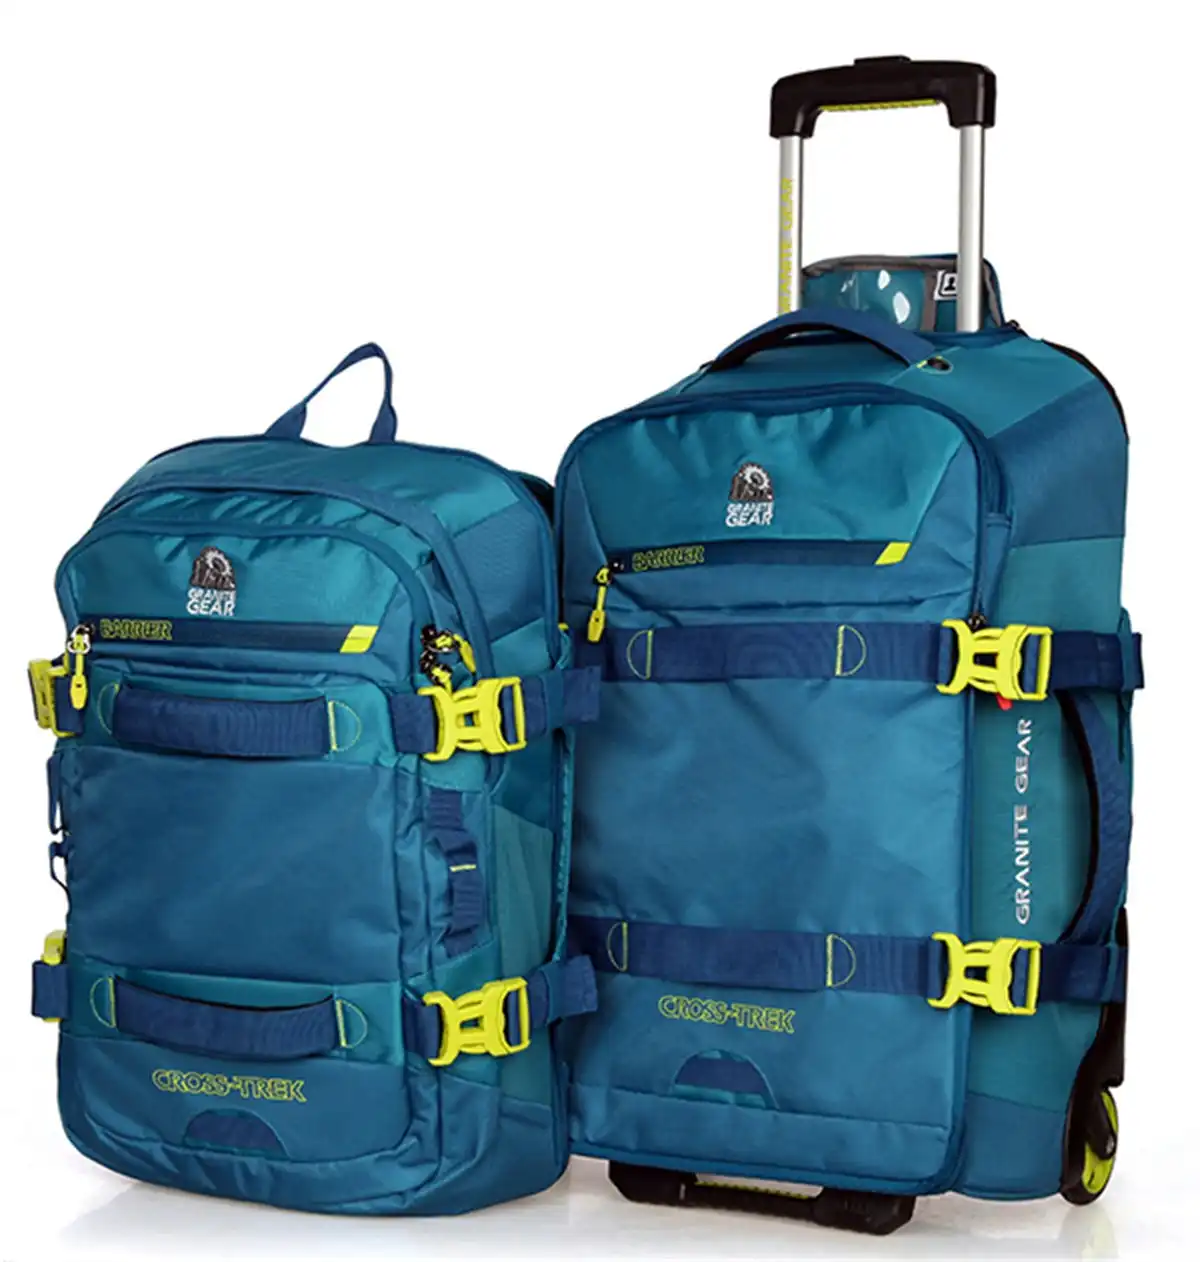 Granite Gear Wheeled Duffle 2PCS Set Separable Backpack With Wheel Suitcase Luggage Tote Carry On G2024-5003